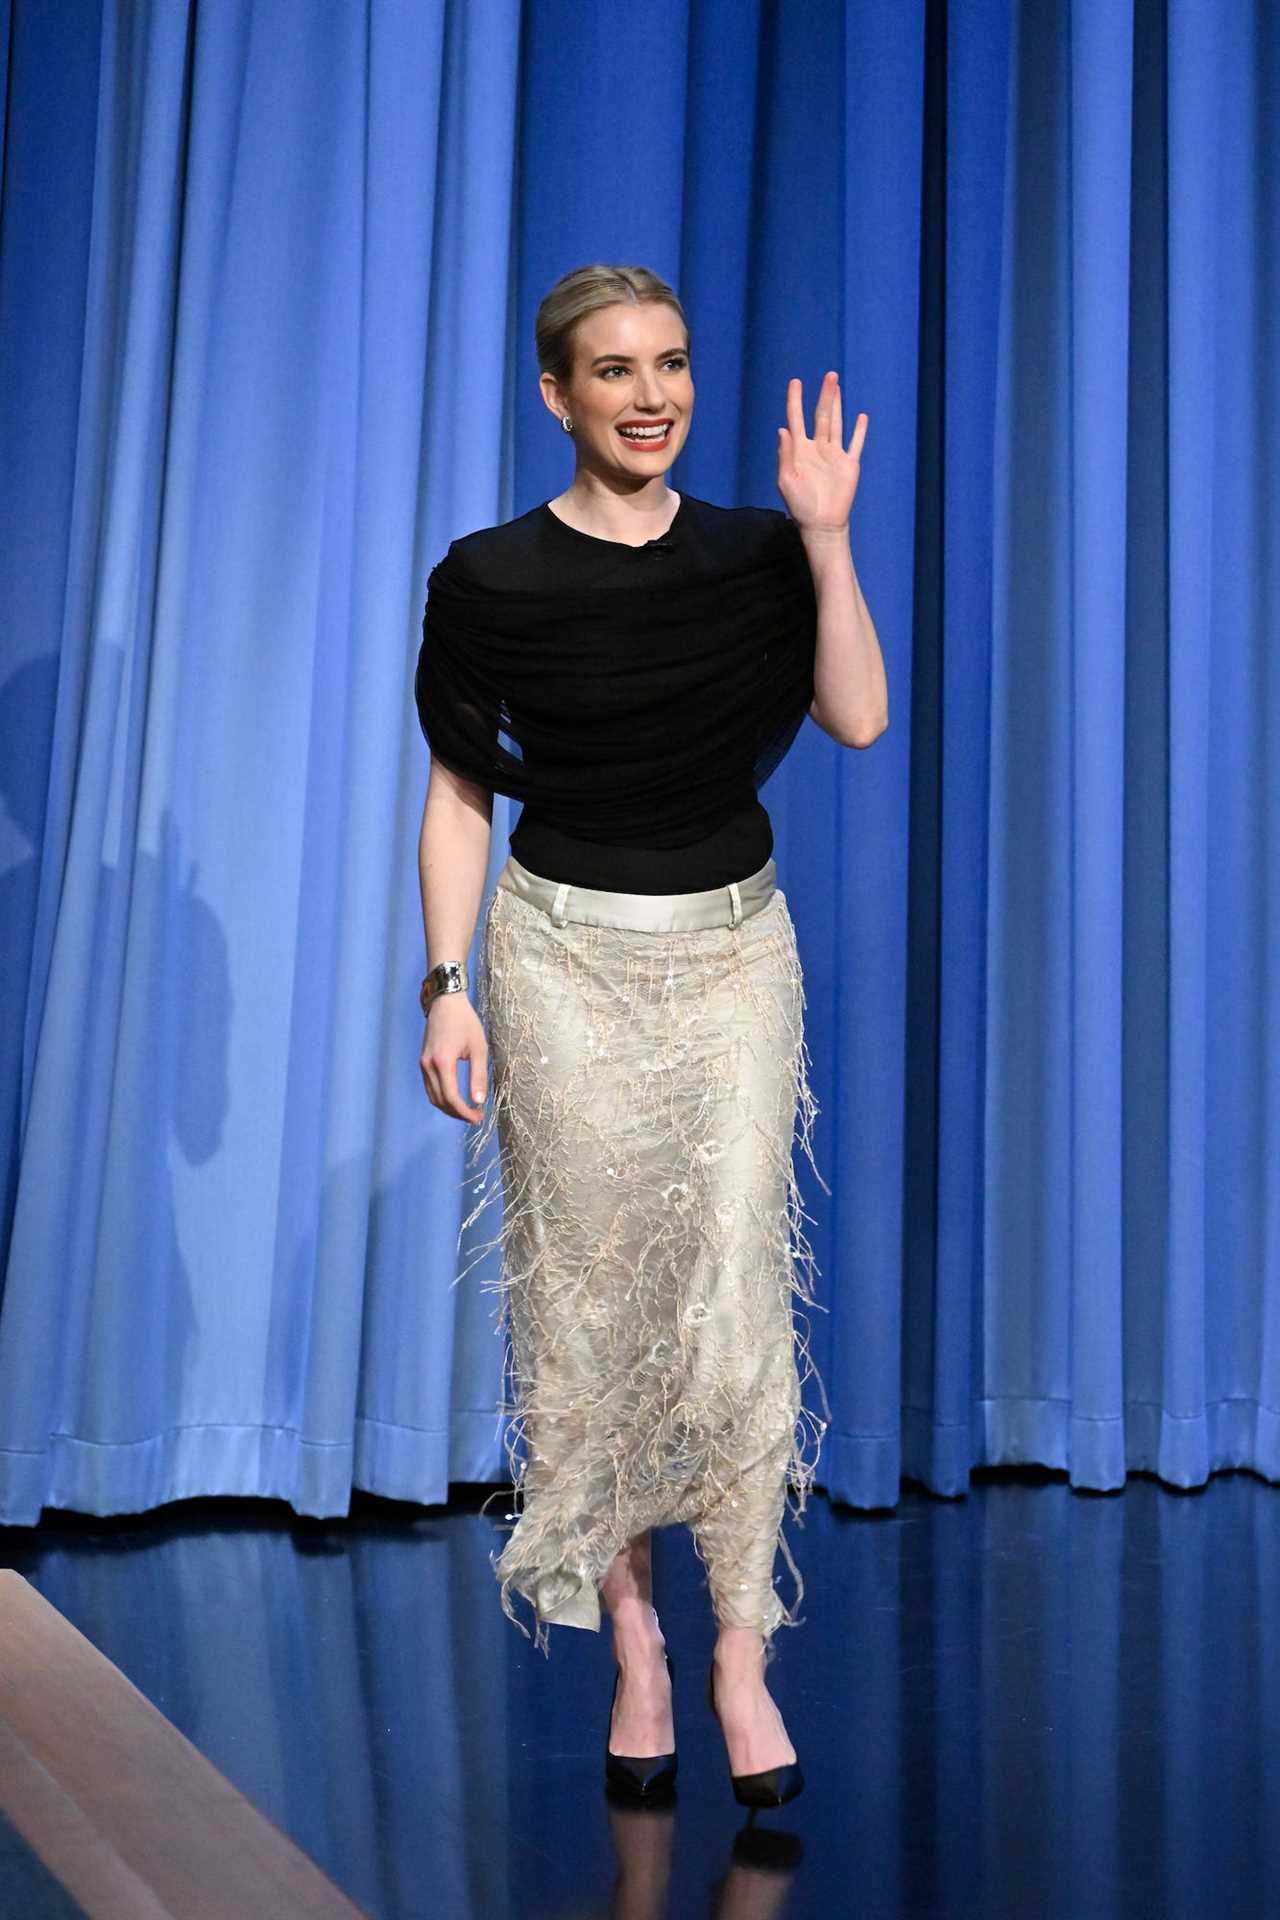 Emma Roberts appears on "The Tonight Show starring Jimmy Fallon" in New York City.